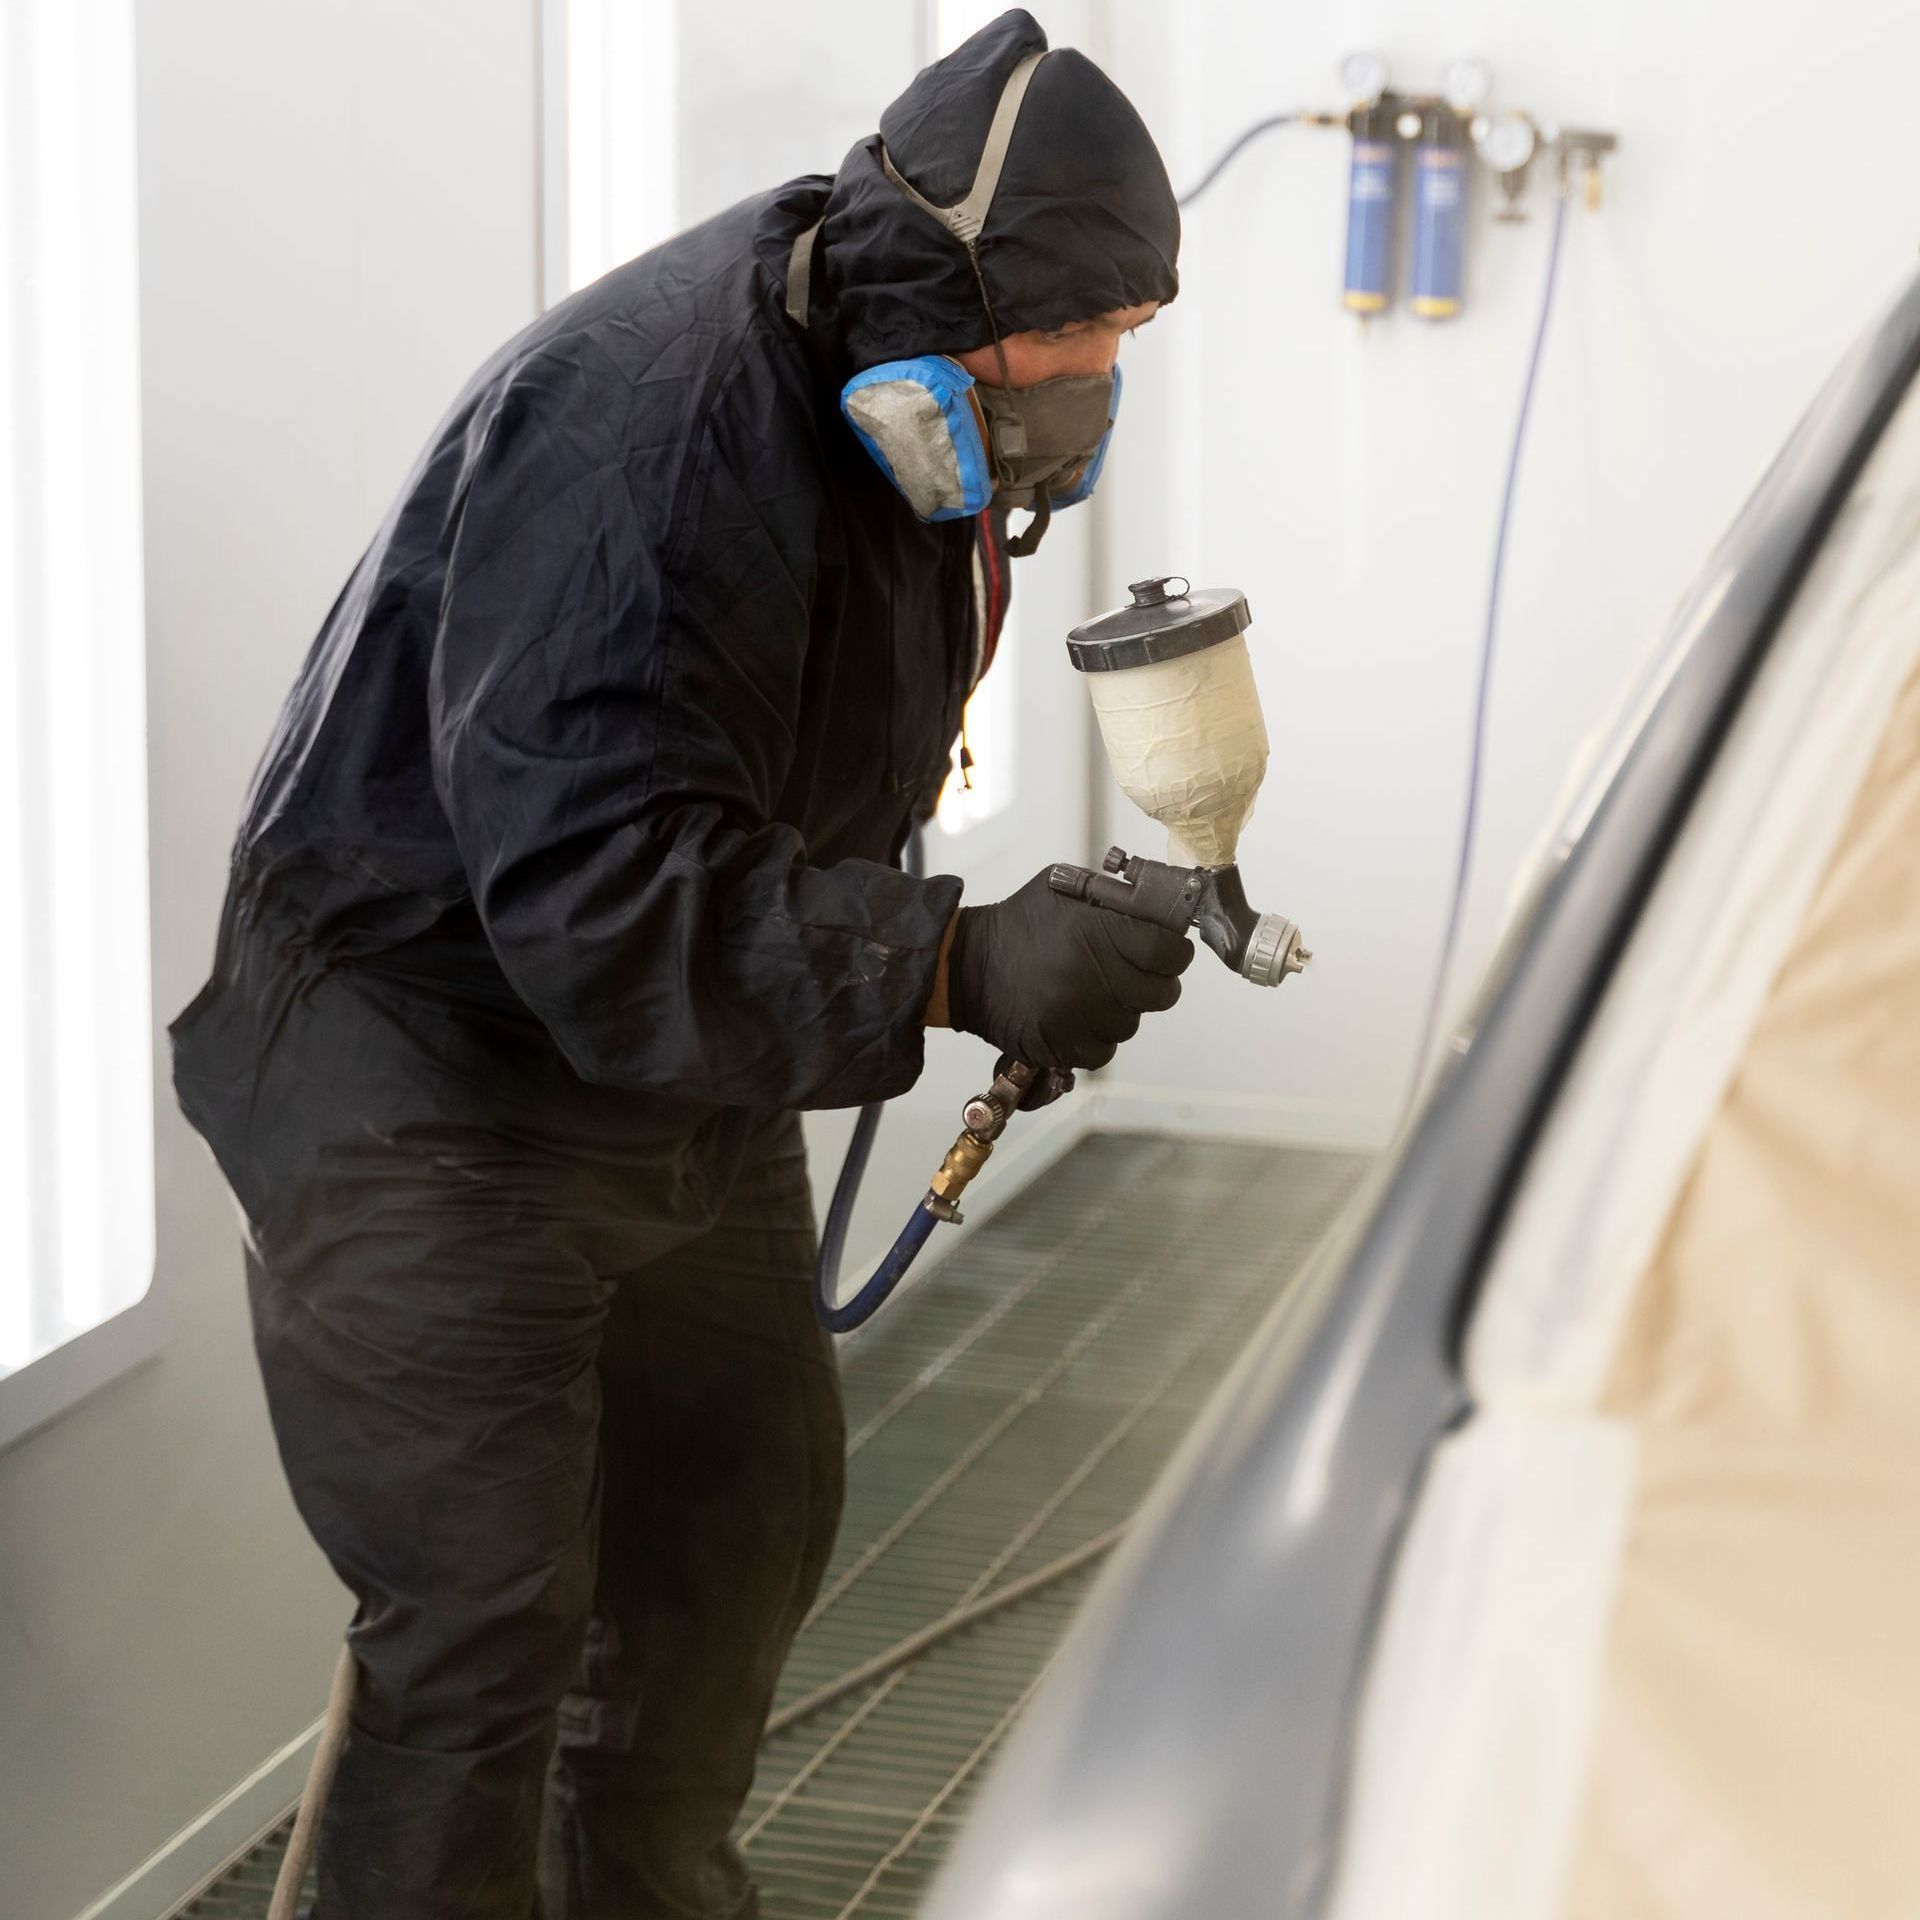 a man wearing a mask is spray painting a car